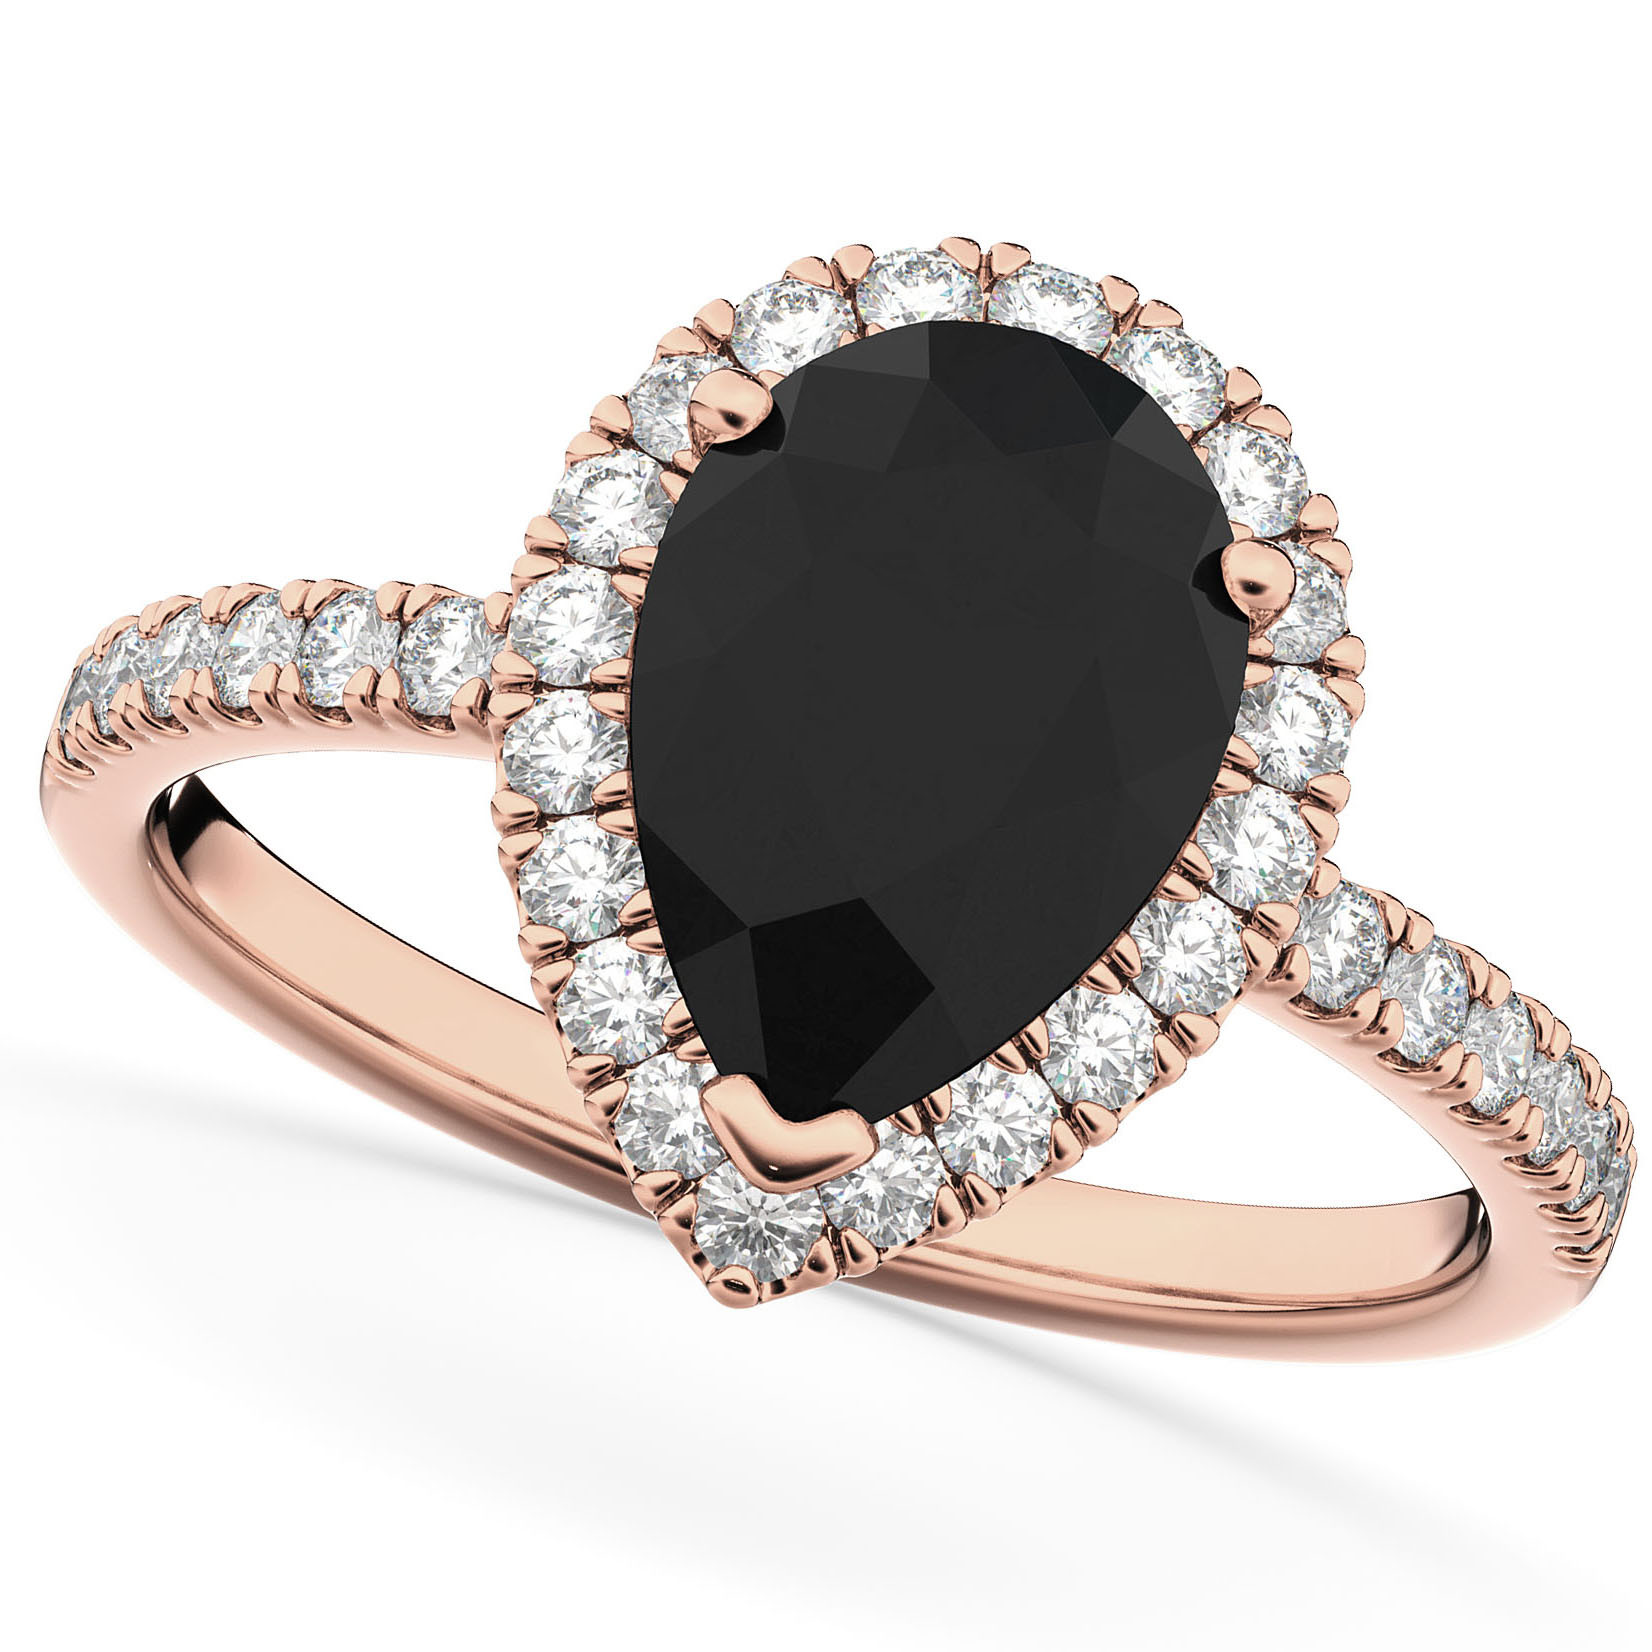 Black Diamond And Rose Gold Engagement Rings
 Pear Black Diamond & Diamond Engagement Ring 14K Rose Gold